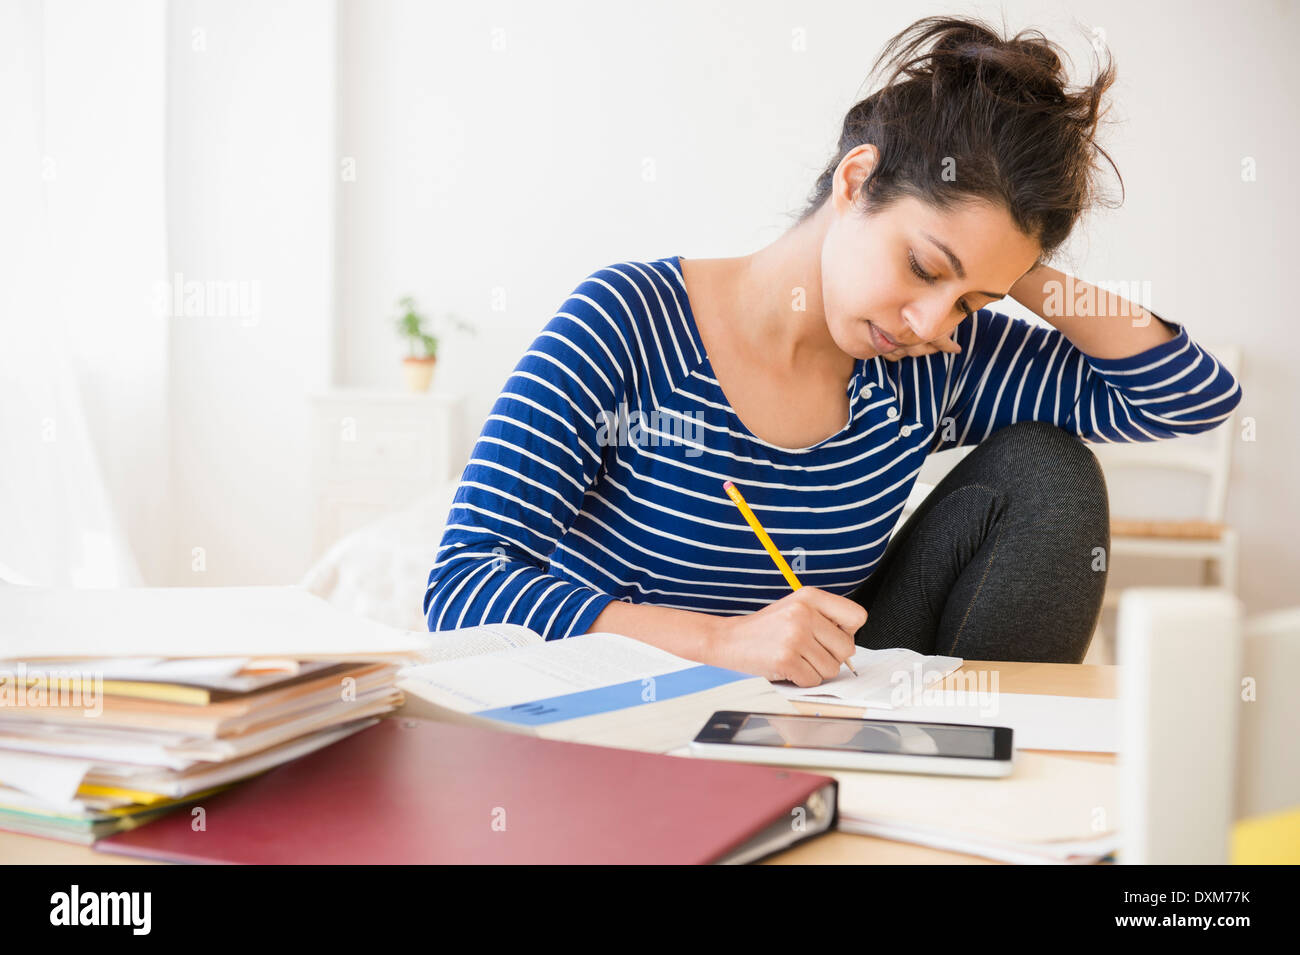 Asian student studying at table Stock Photo